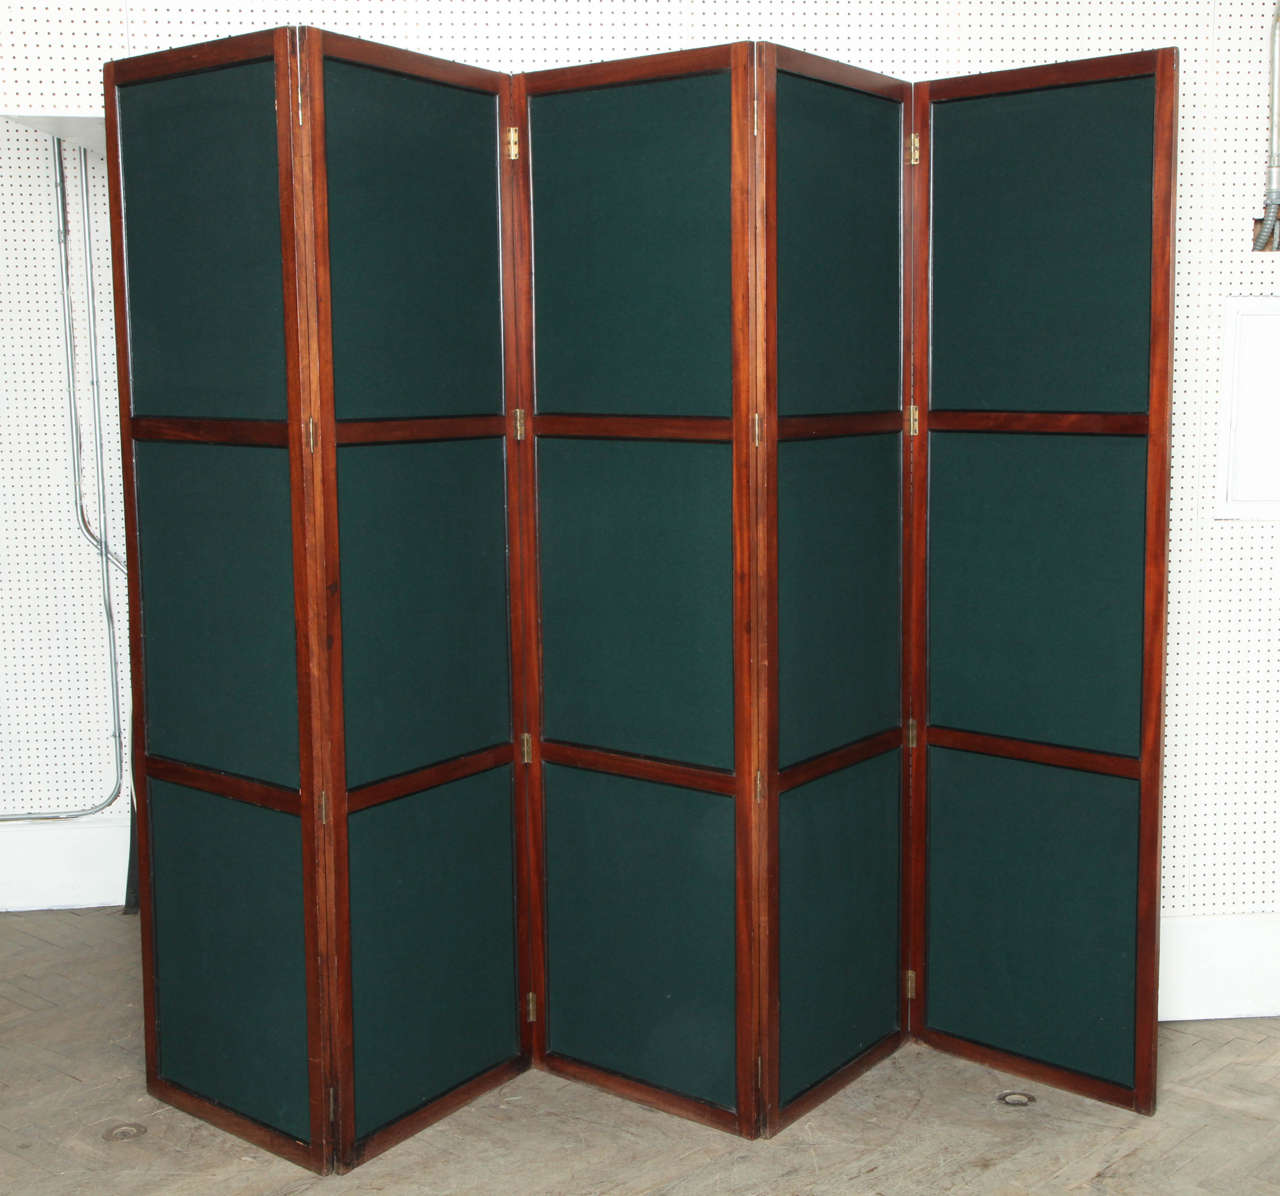 This is an antique screen or divider made of mahogany and inset with fabric. These screens were historically used to block off or hide areas of the room with servers or dining prep during the victorian era. 

MEASUREMENTS PER PANEL